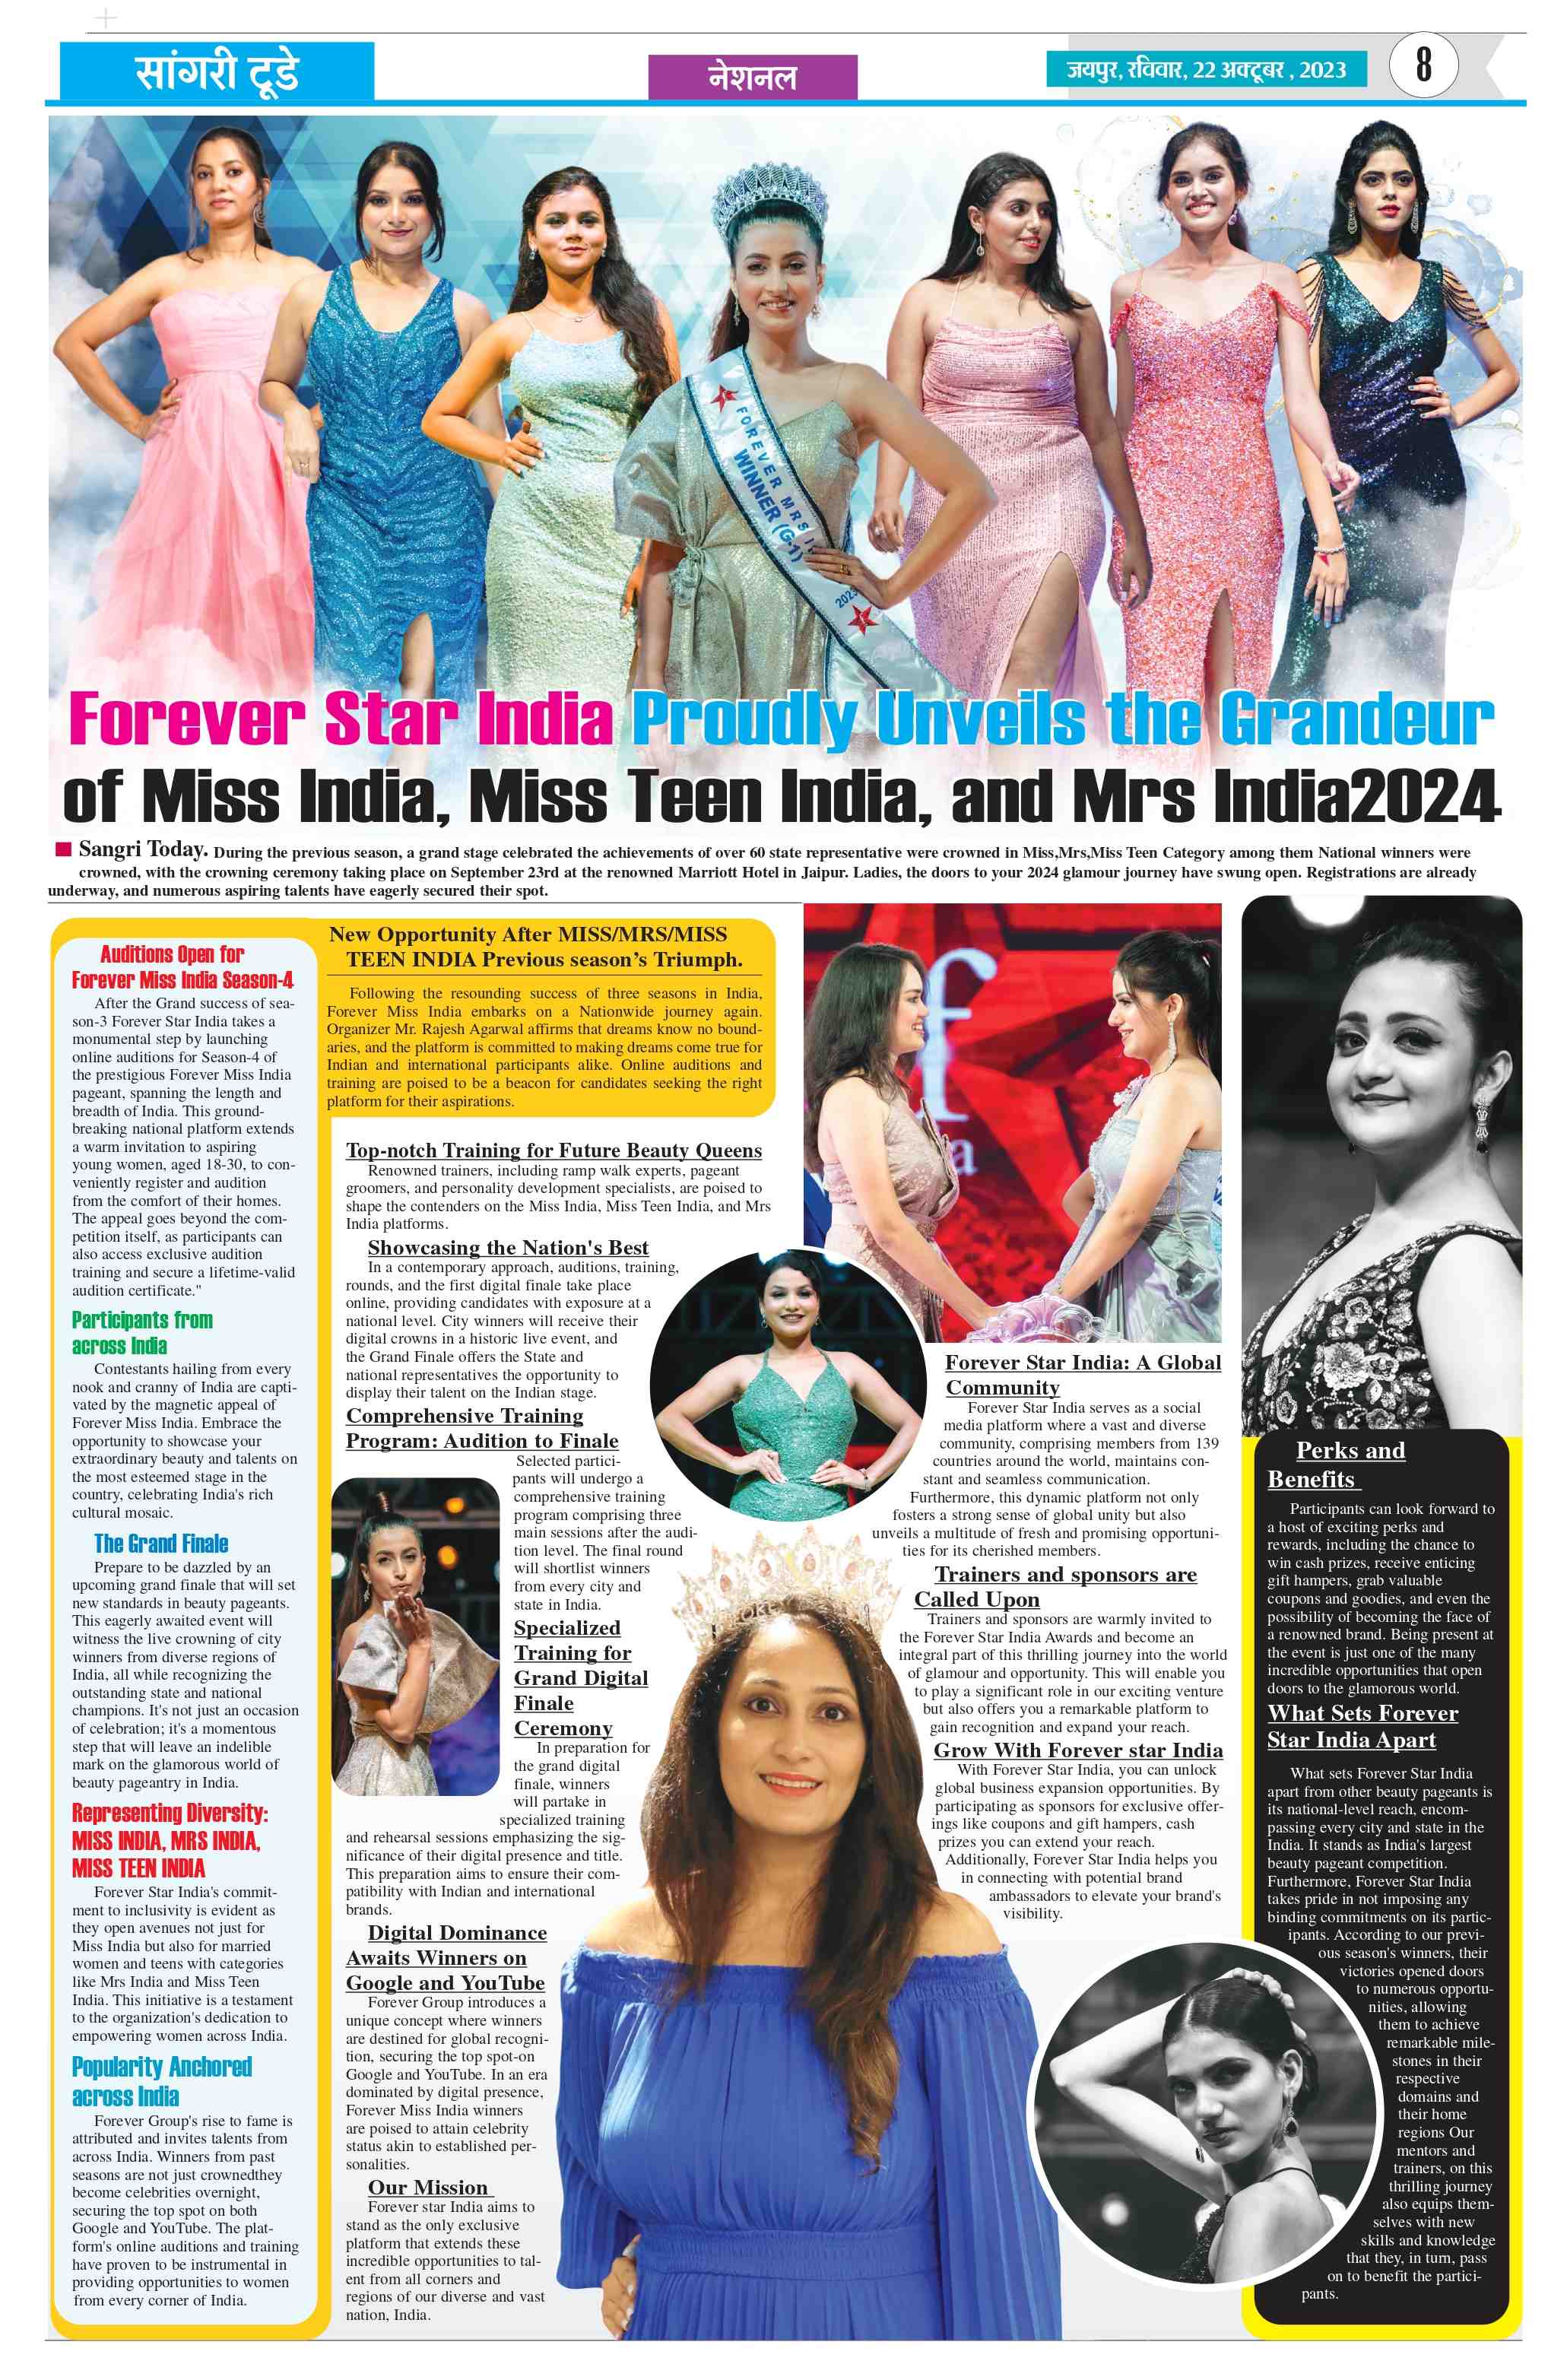 Miss India 2024 Registrationis Open Now